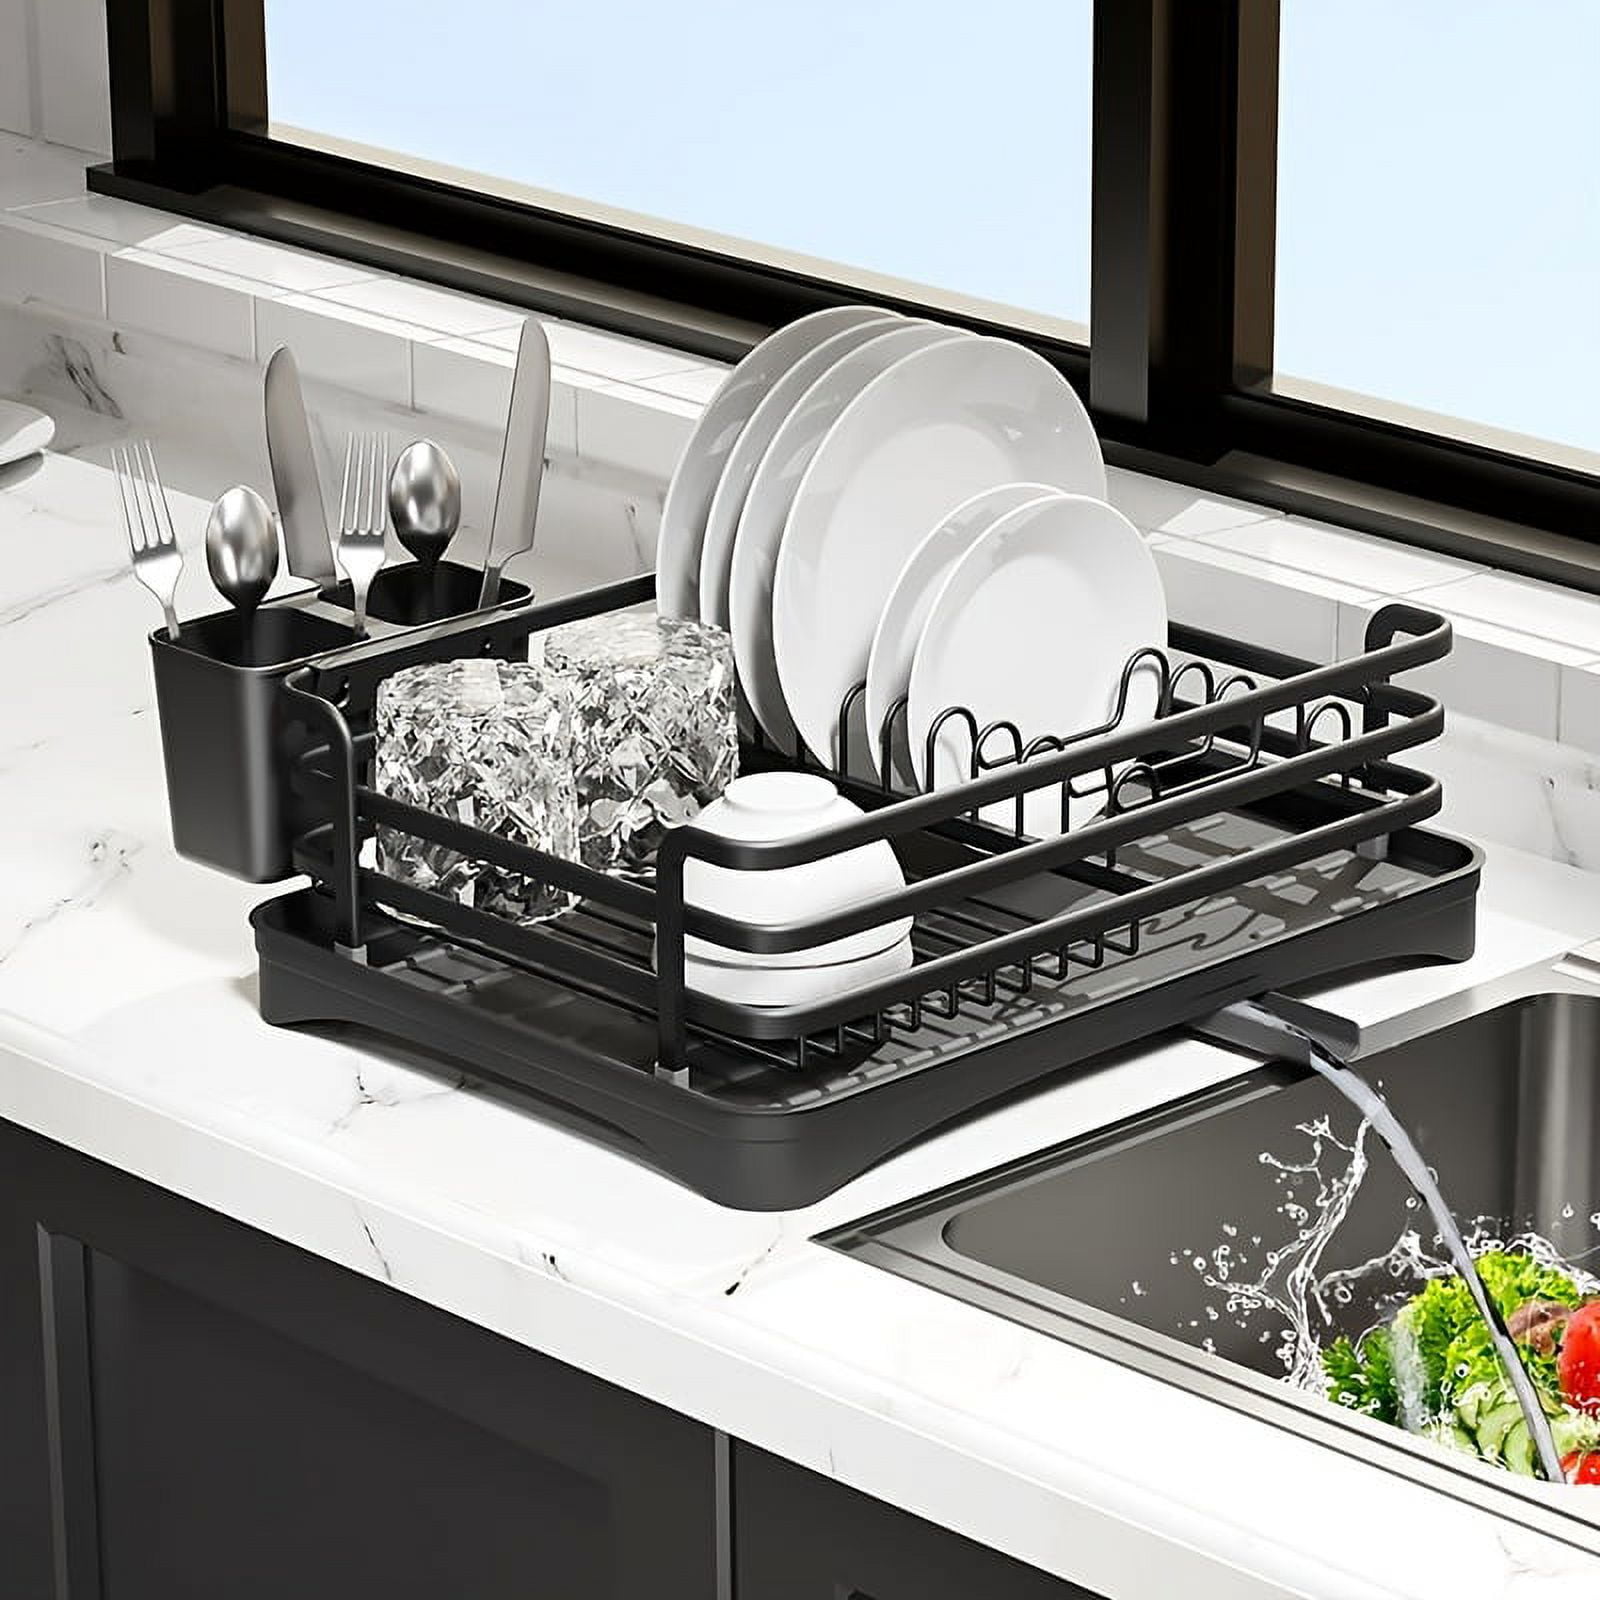 Dish Drying Rack Revolution : Space-Saving Solutions for Modern Kitchens